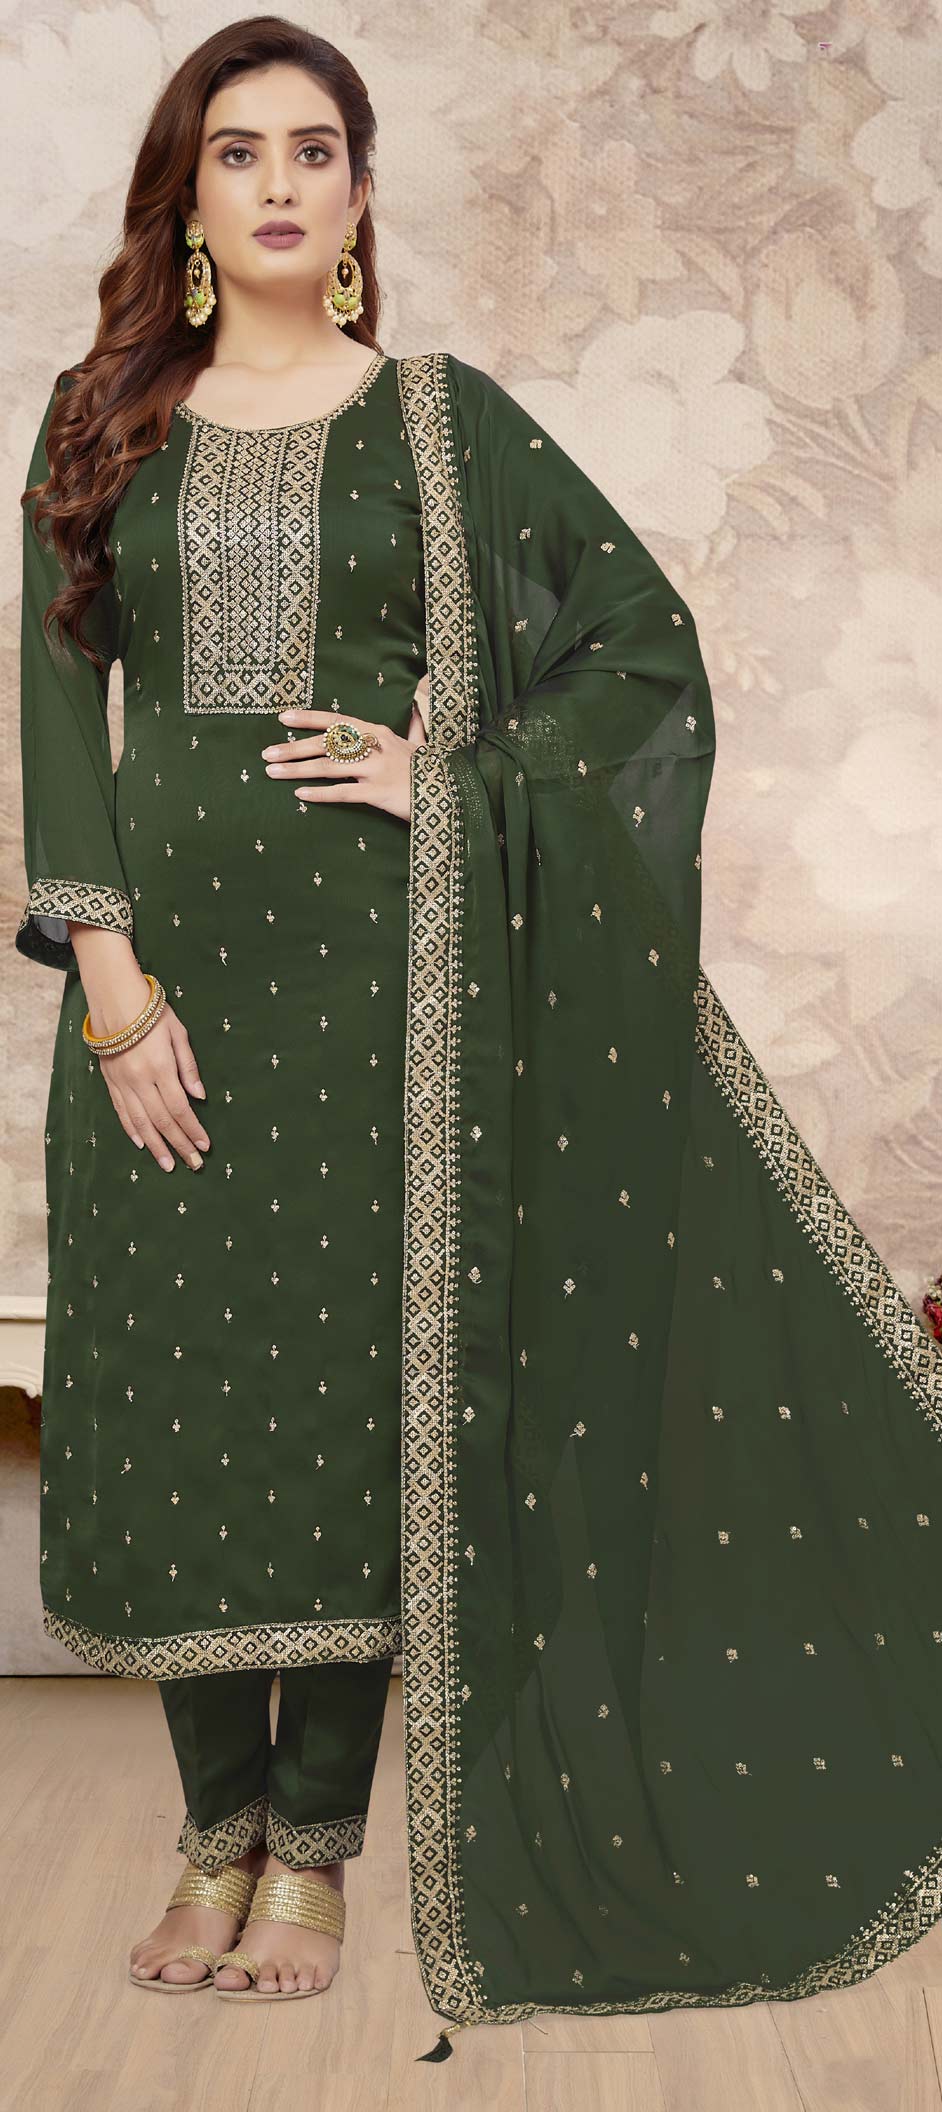 RE - Green Colored Semi-Stitched Salwar Suit - Featured Product